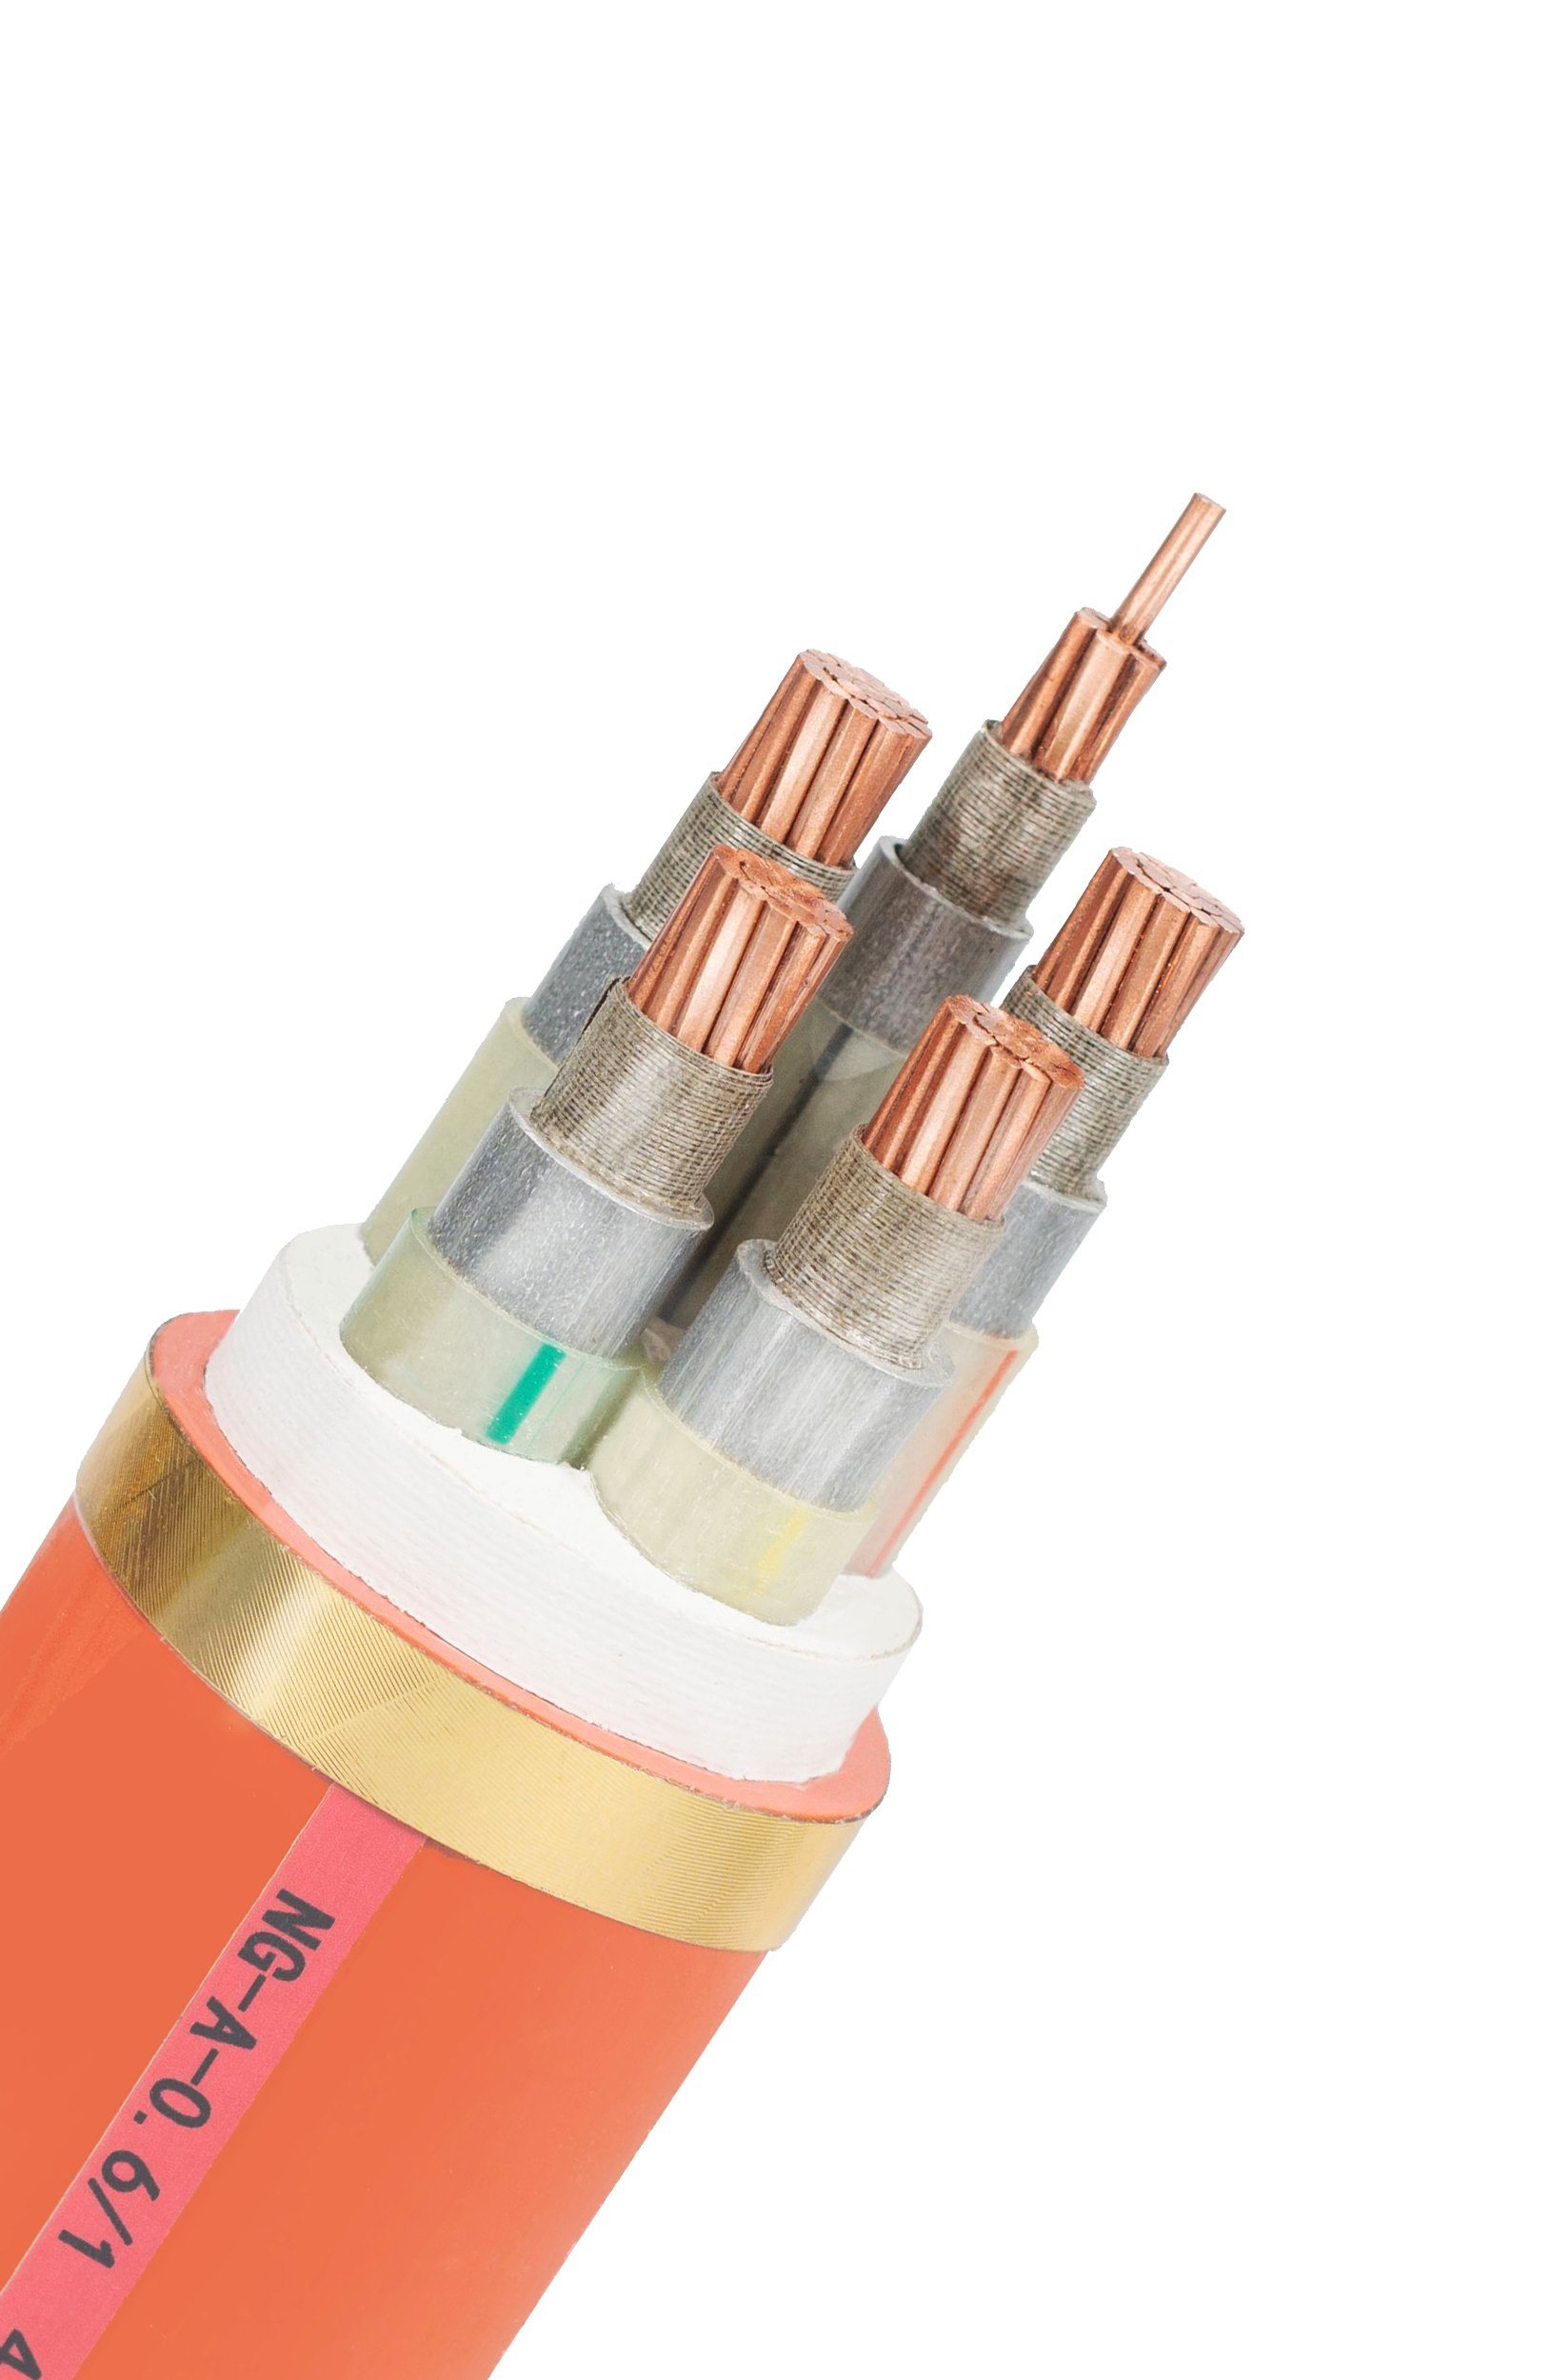 Alarm Cable 24AWG Unshielded or Shielded 4core 6core 8core Multi Core 100m Reel Stranded Control Cable Wire Security Alarm Cable